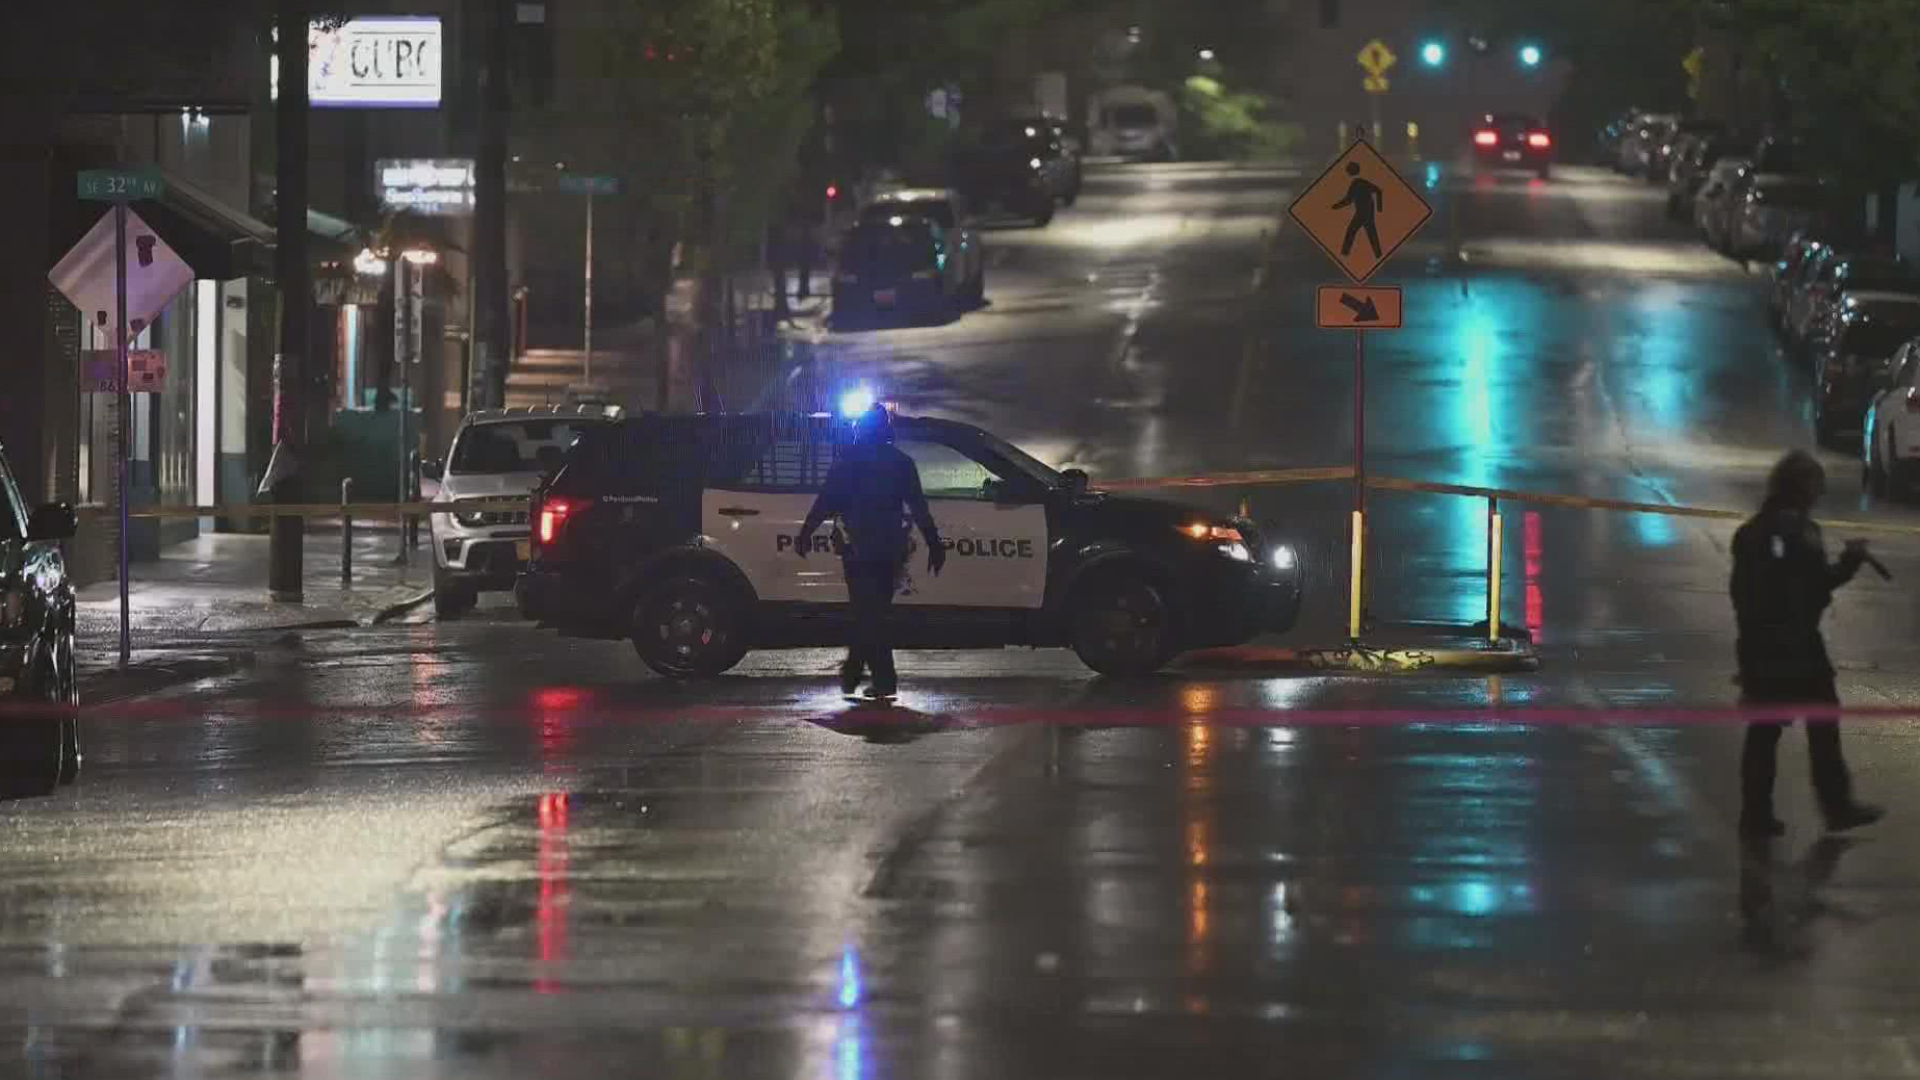 In addition to several major crashes and other incidents, Portland police were spread thin responding to the series of shootings overnight.